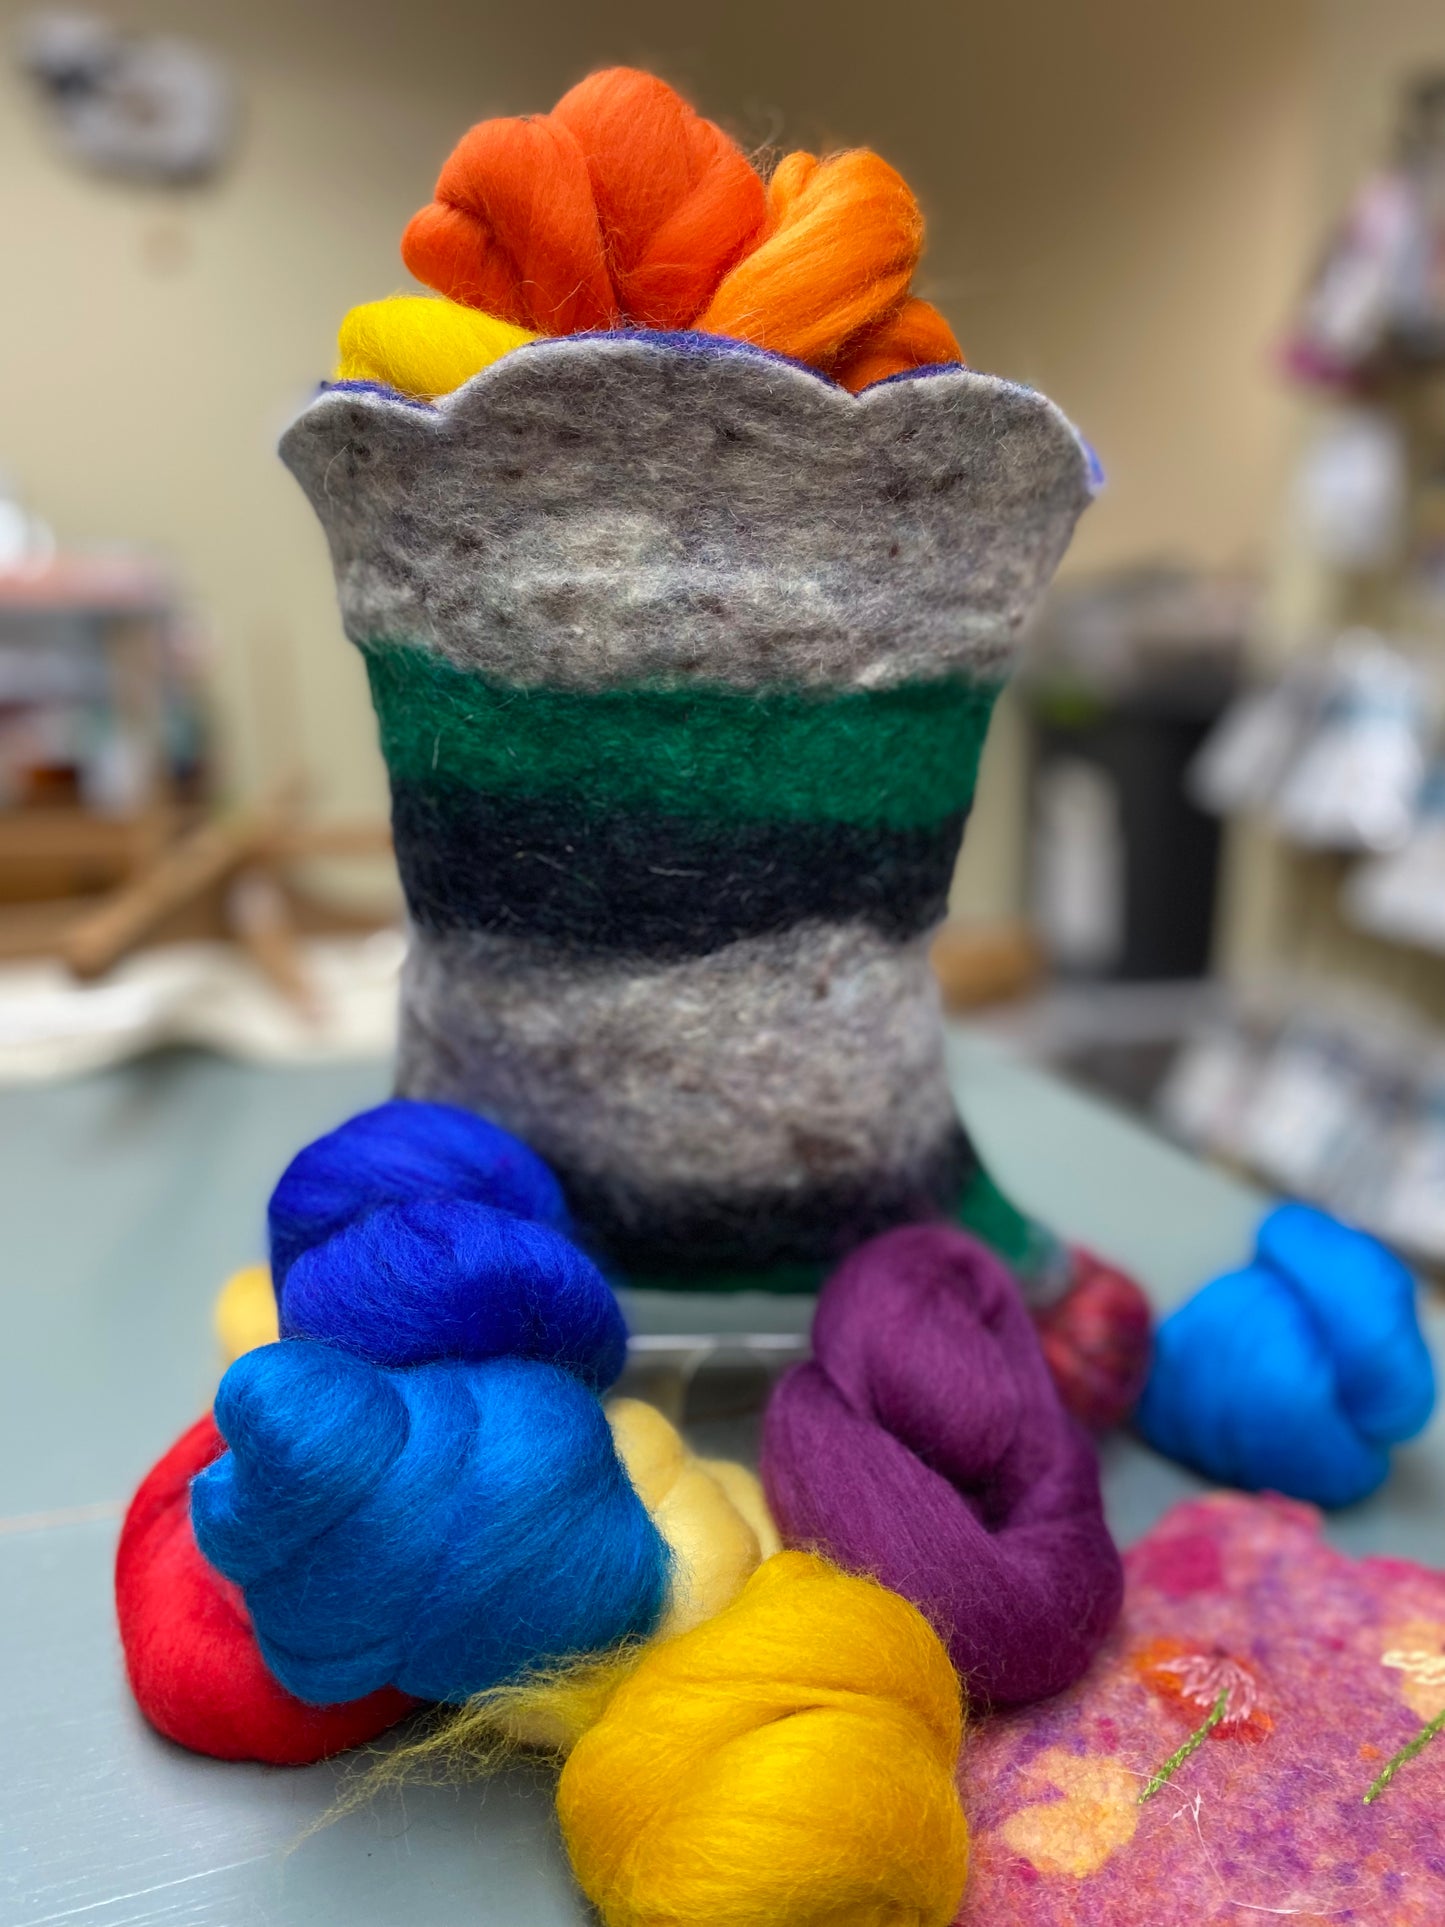 Workshop: Wet Felting a 2-sided Wool Project Bag with Carissa Schlesinger